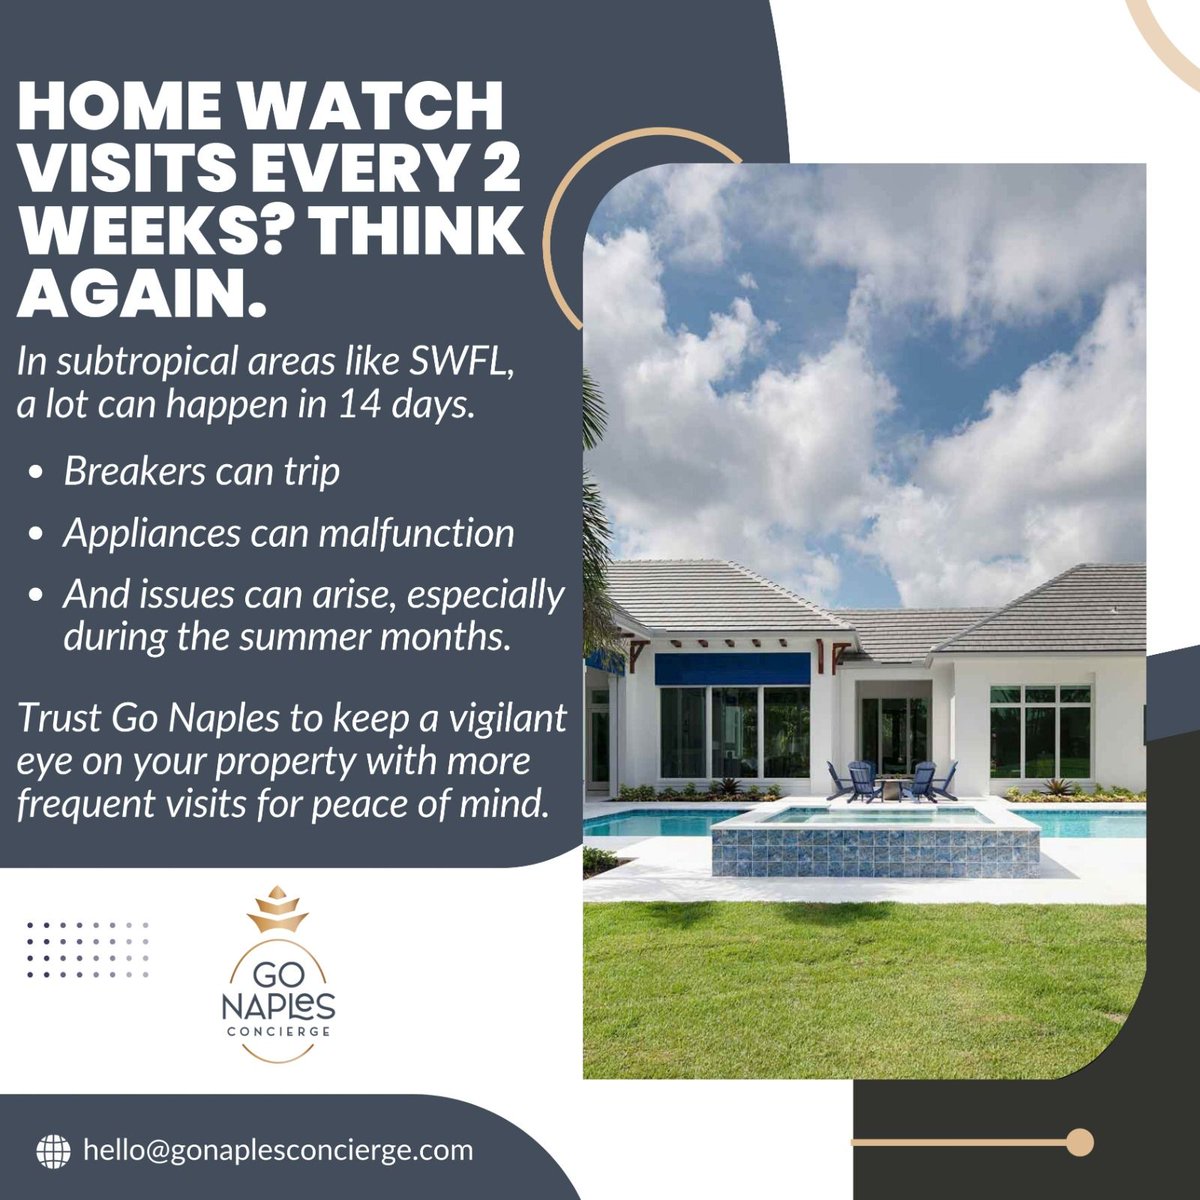 Home Watch Visits Every 2 Weeks? Think Again. In subtropical areas like SWFL, a lot can happen in 14 days. 
--
📞Contact us: (239) 360-3605 | Hello@gonaplesconcierge.com   
.
#NaplesBusiness #PropertyCare #NaplesHomeWatch #PropertyCare #PersonalizedConcierge #HomeMaintenance